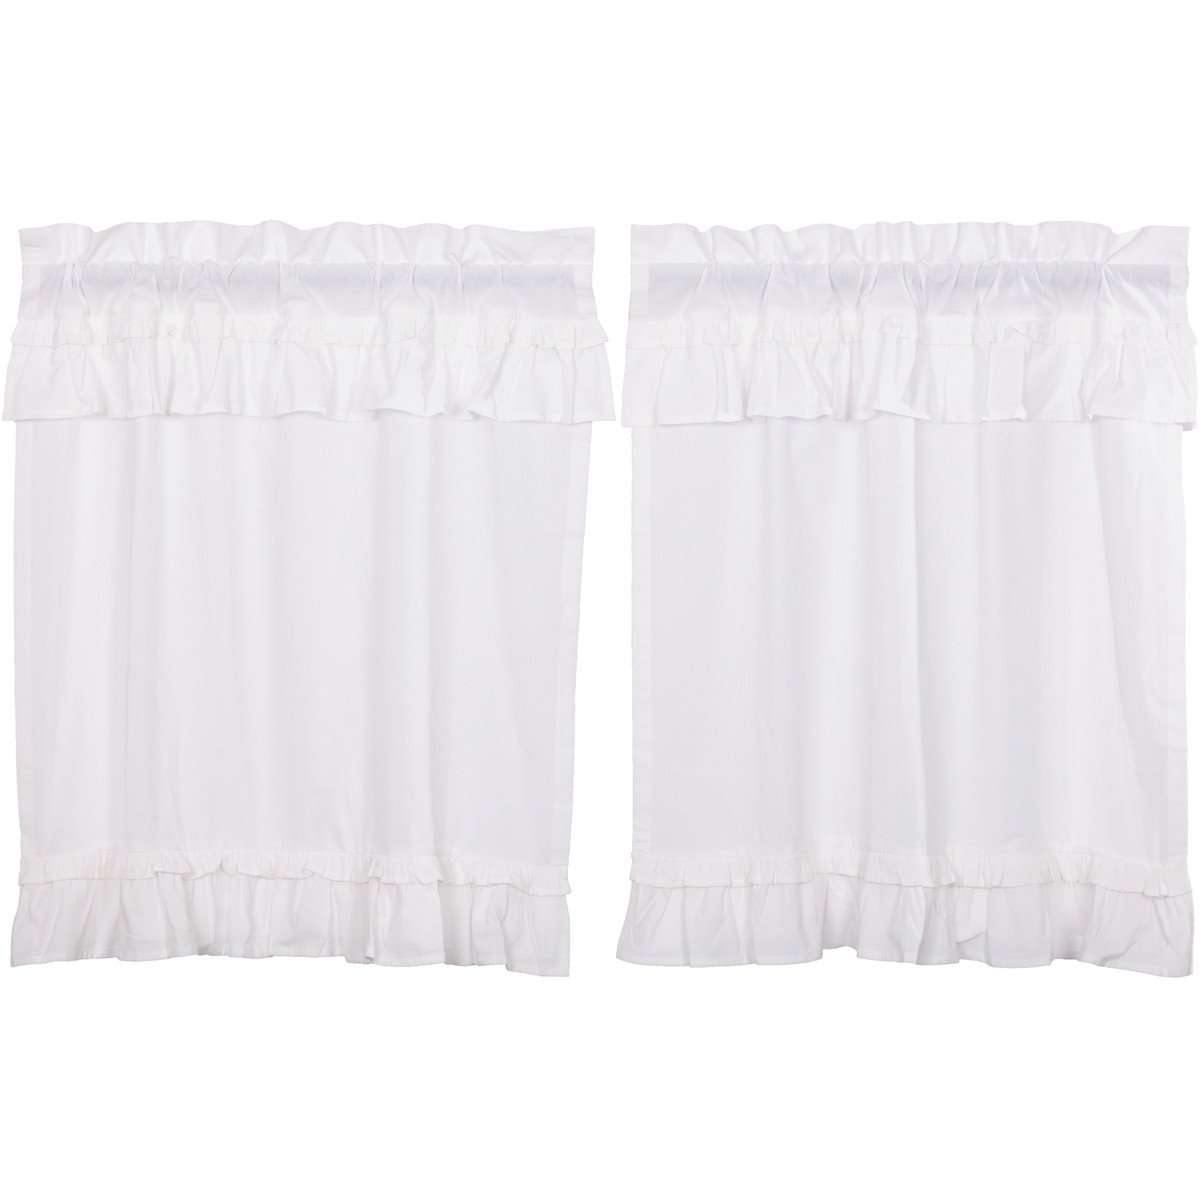 Muslin Ruffled Bleached White Tier Curtain Set of 2 L36xW36 VHC Brands - The Fox Decor